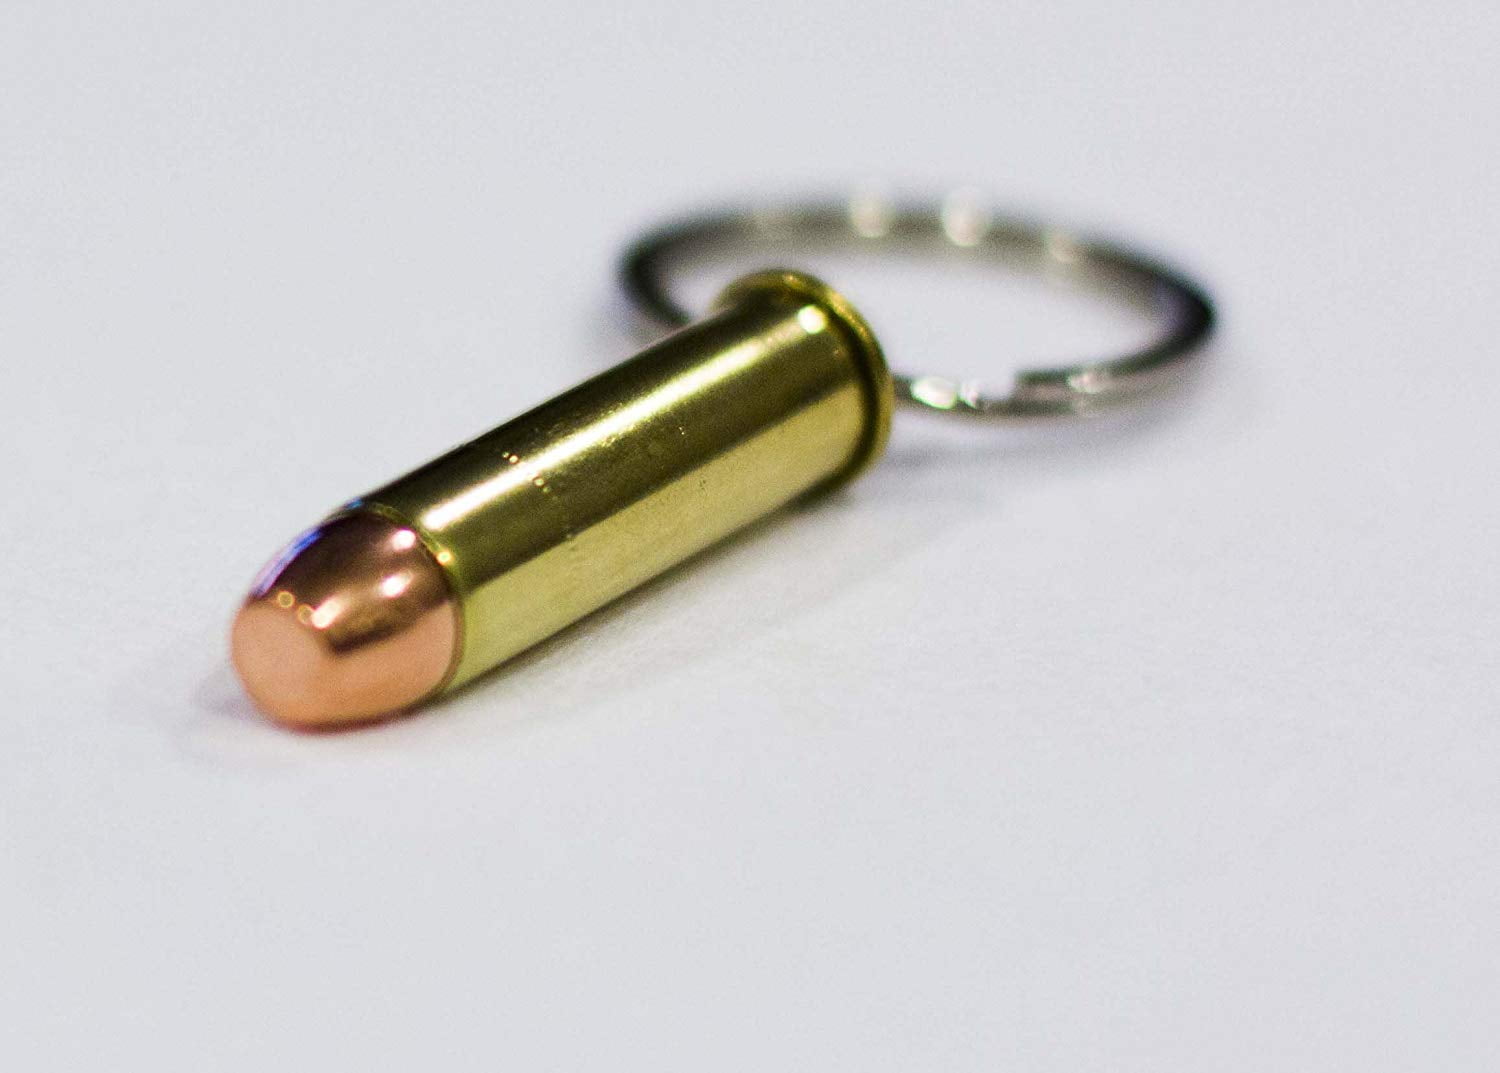 .357 Bullet Key Chain Free Shipping 